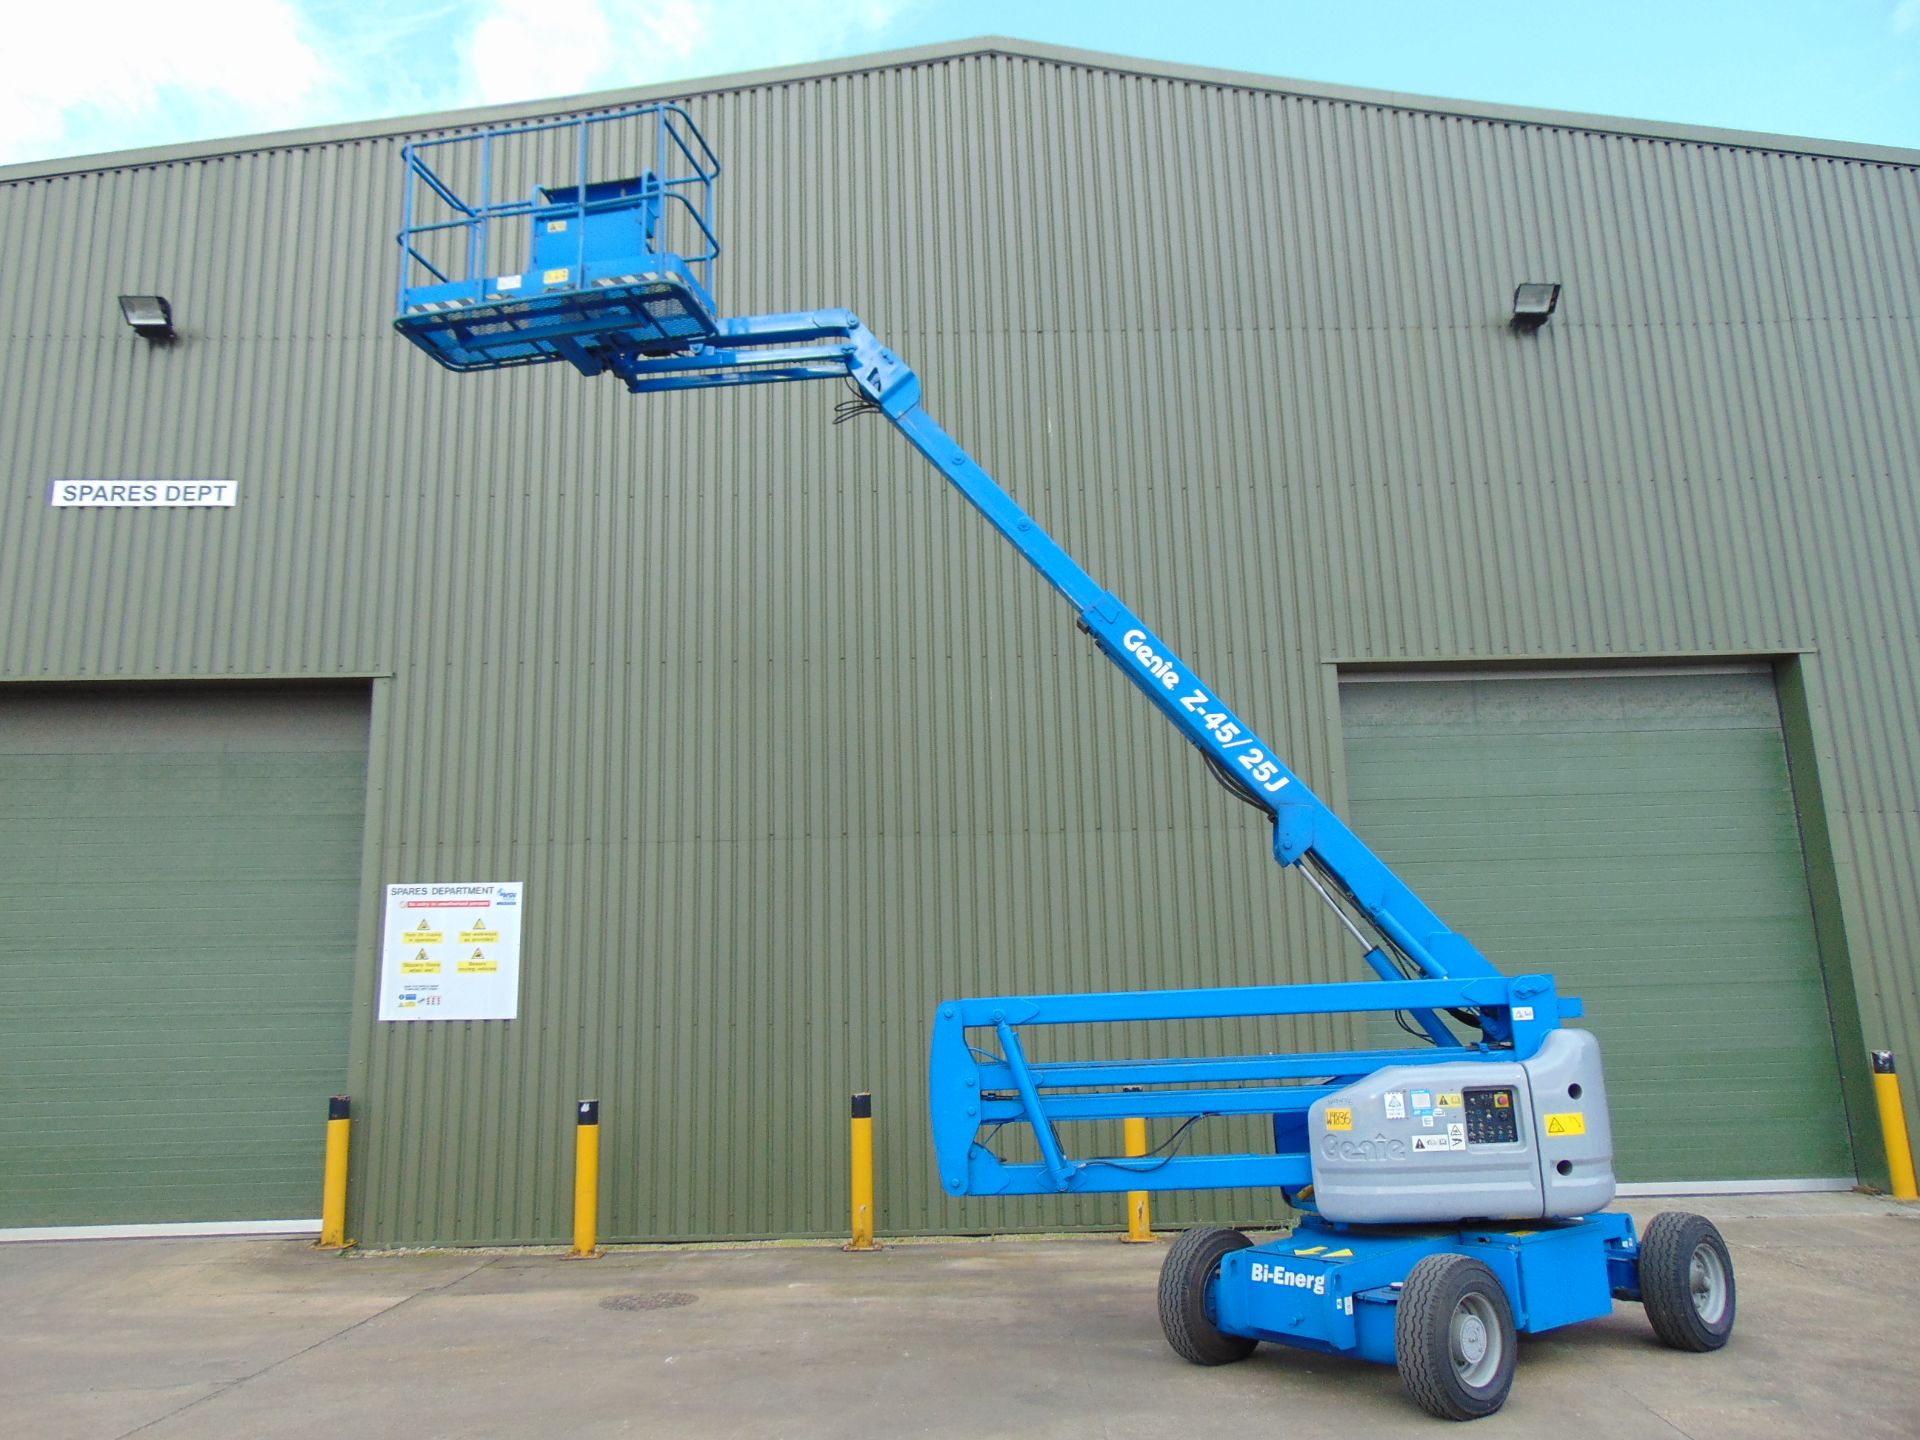 2005 Genie Z45-25J Diesel Articulated Boom Lift ONLY 775 HOURS